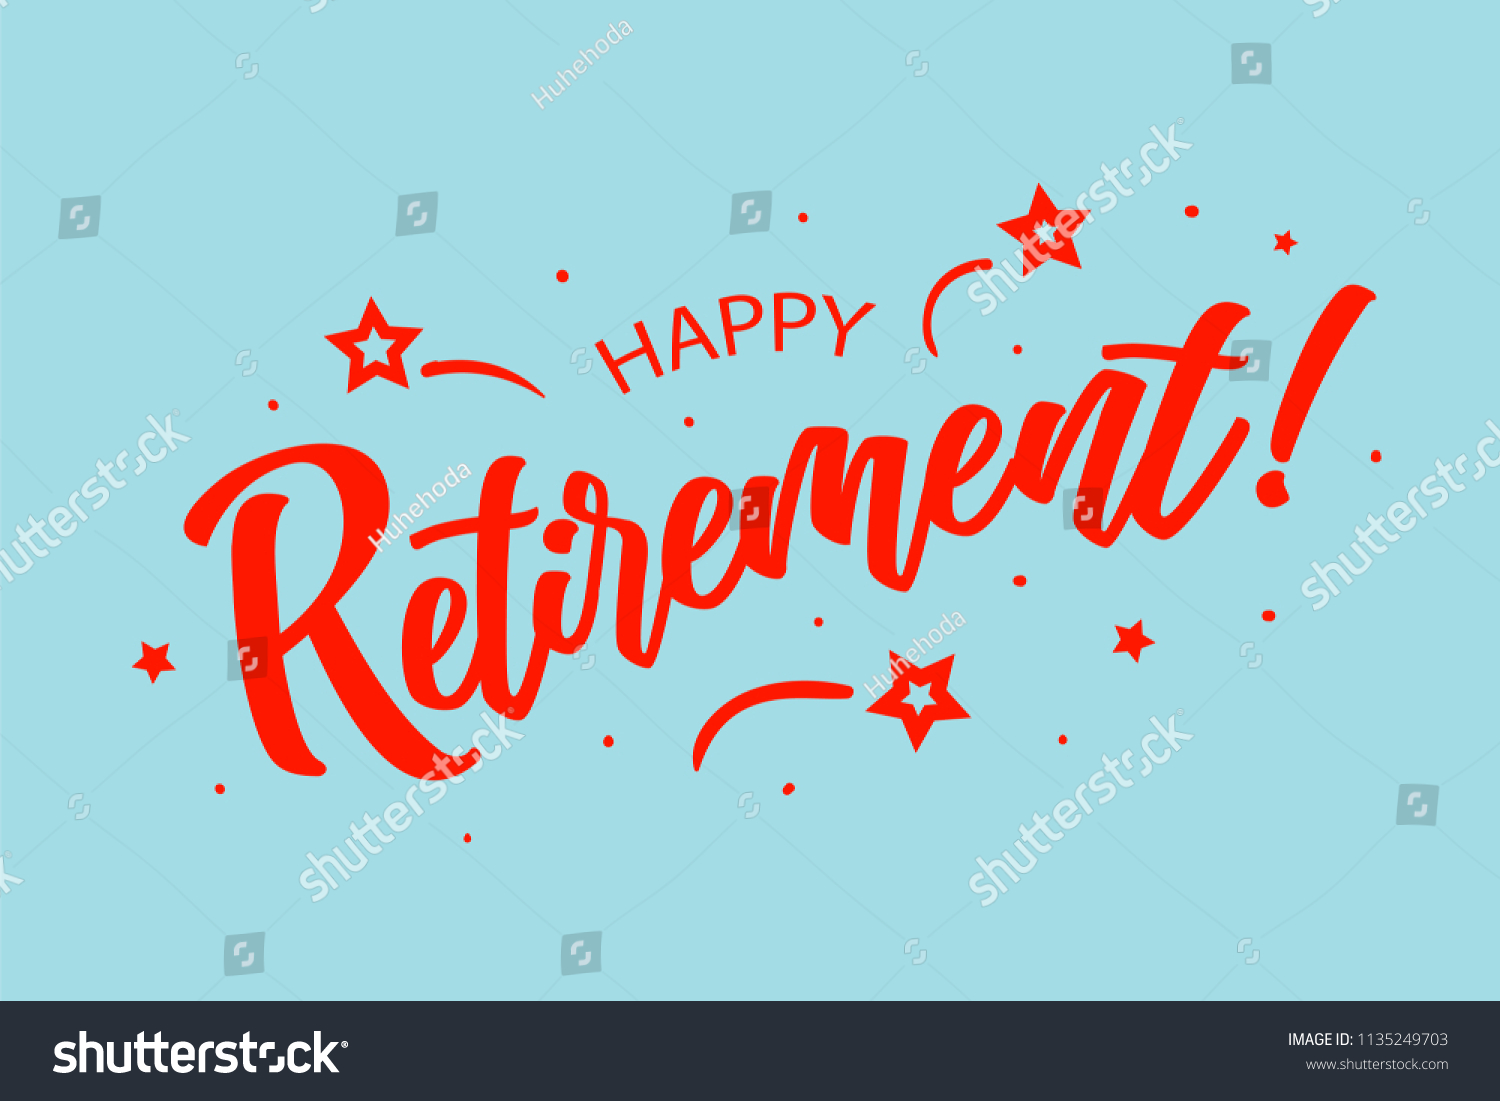 Happy Retirement Card Beautiful Greeting Scratched Stock Vector